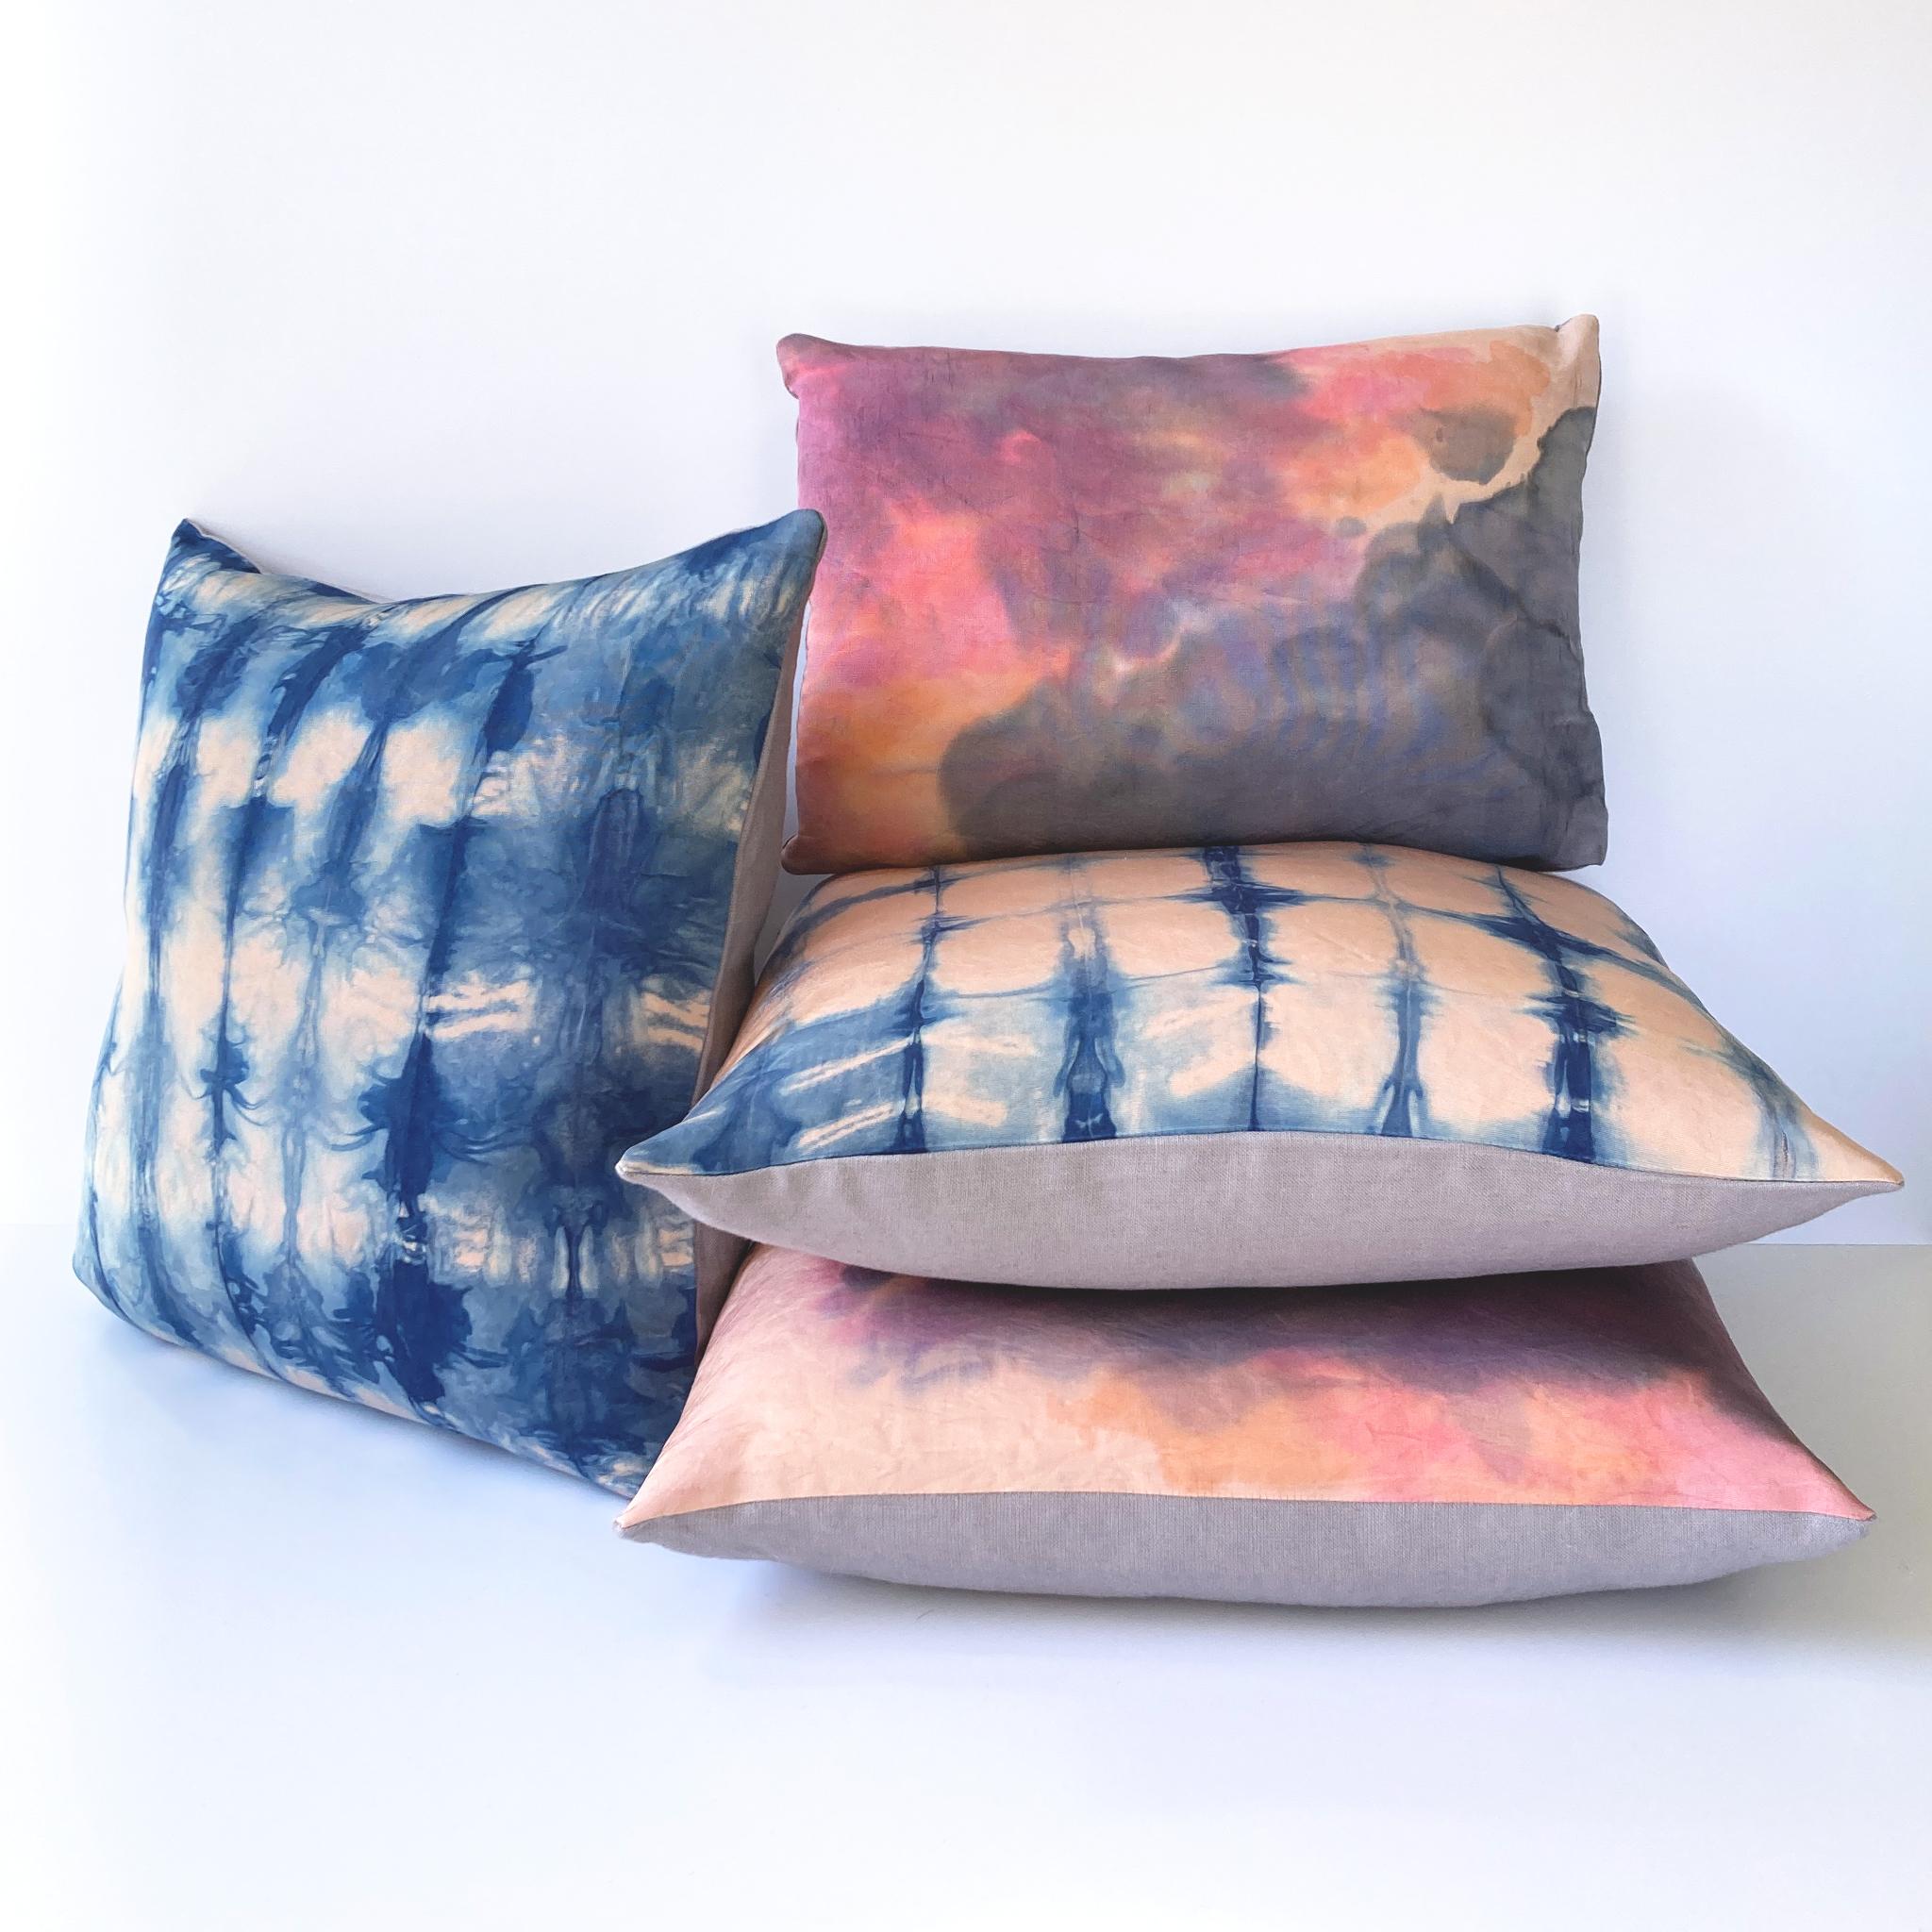 American Hand Dyed Silk Pillow, Rose Pink & Indigo Blue Waves For Sale